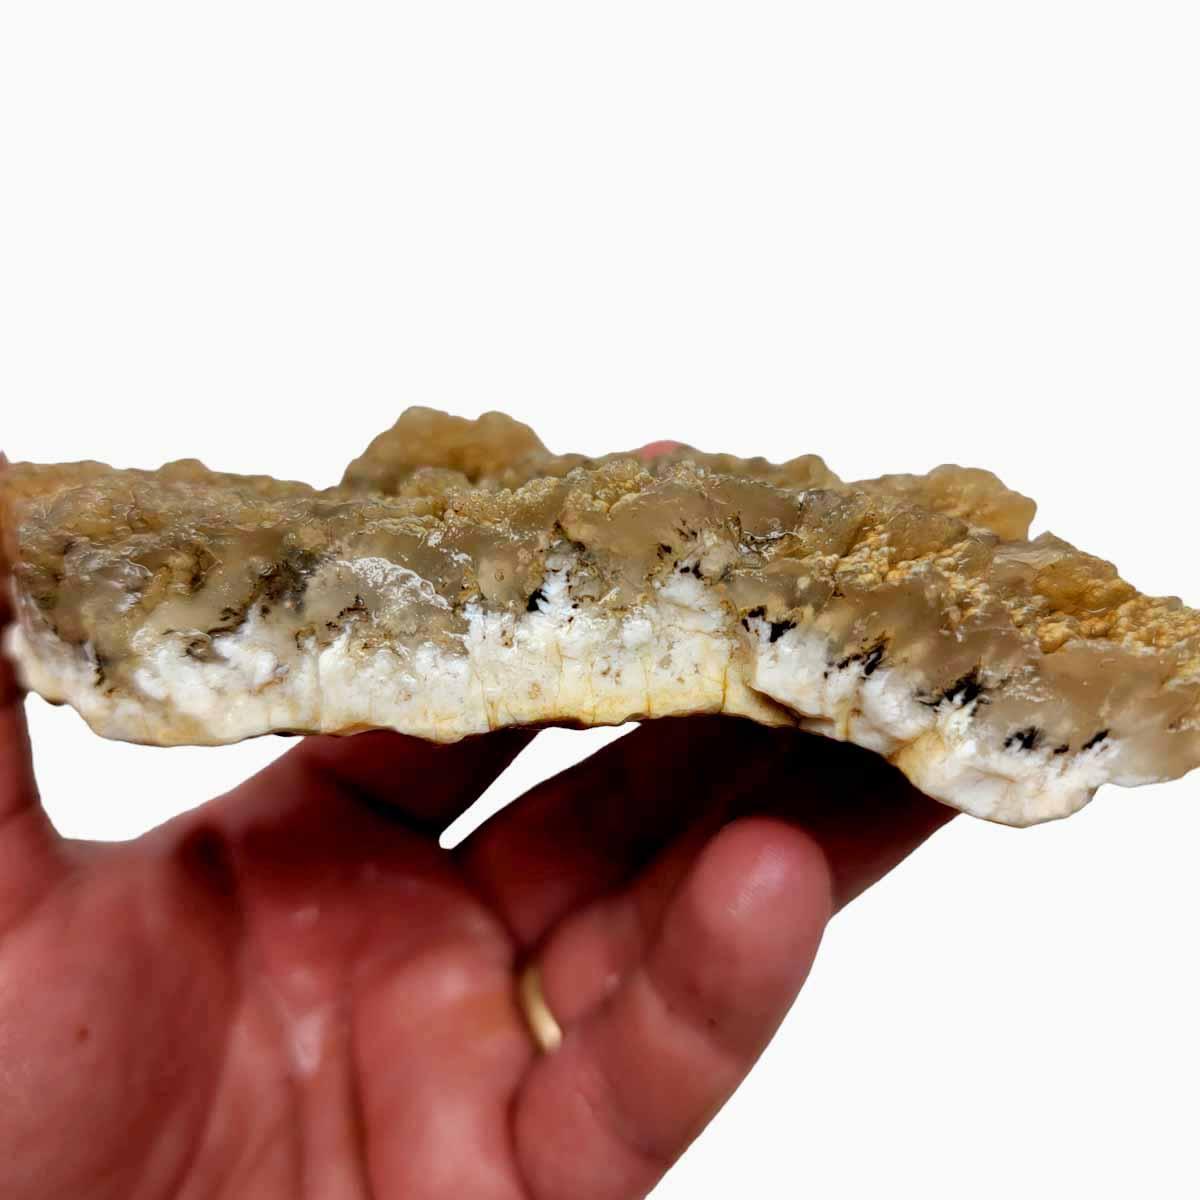 Stinking Water Plume Agate Rough Chunk! - LapidaryCentral